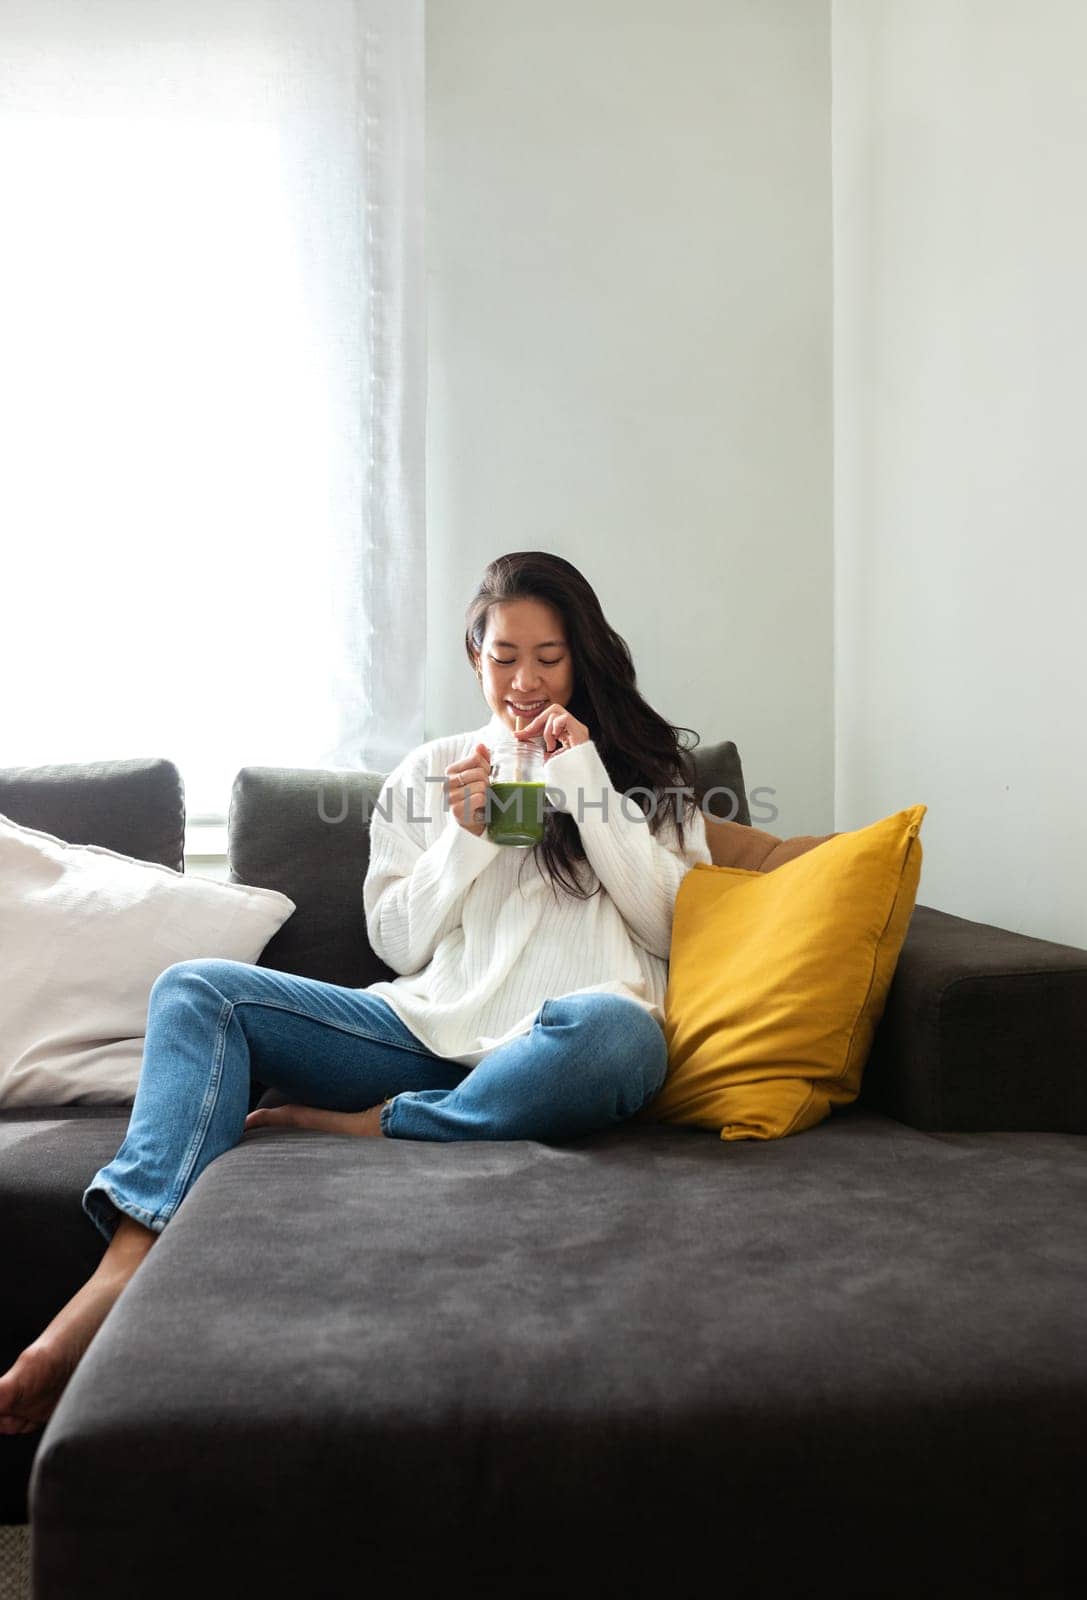 Healthy lifestyle. Young Chinese woman drinking green vegetable juice at home sitting on the sofa. Vertical image. by Hoverstock